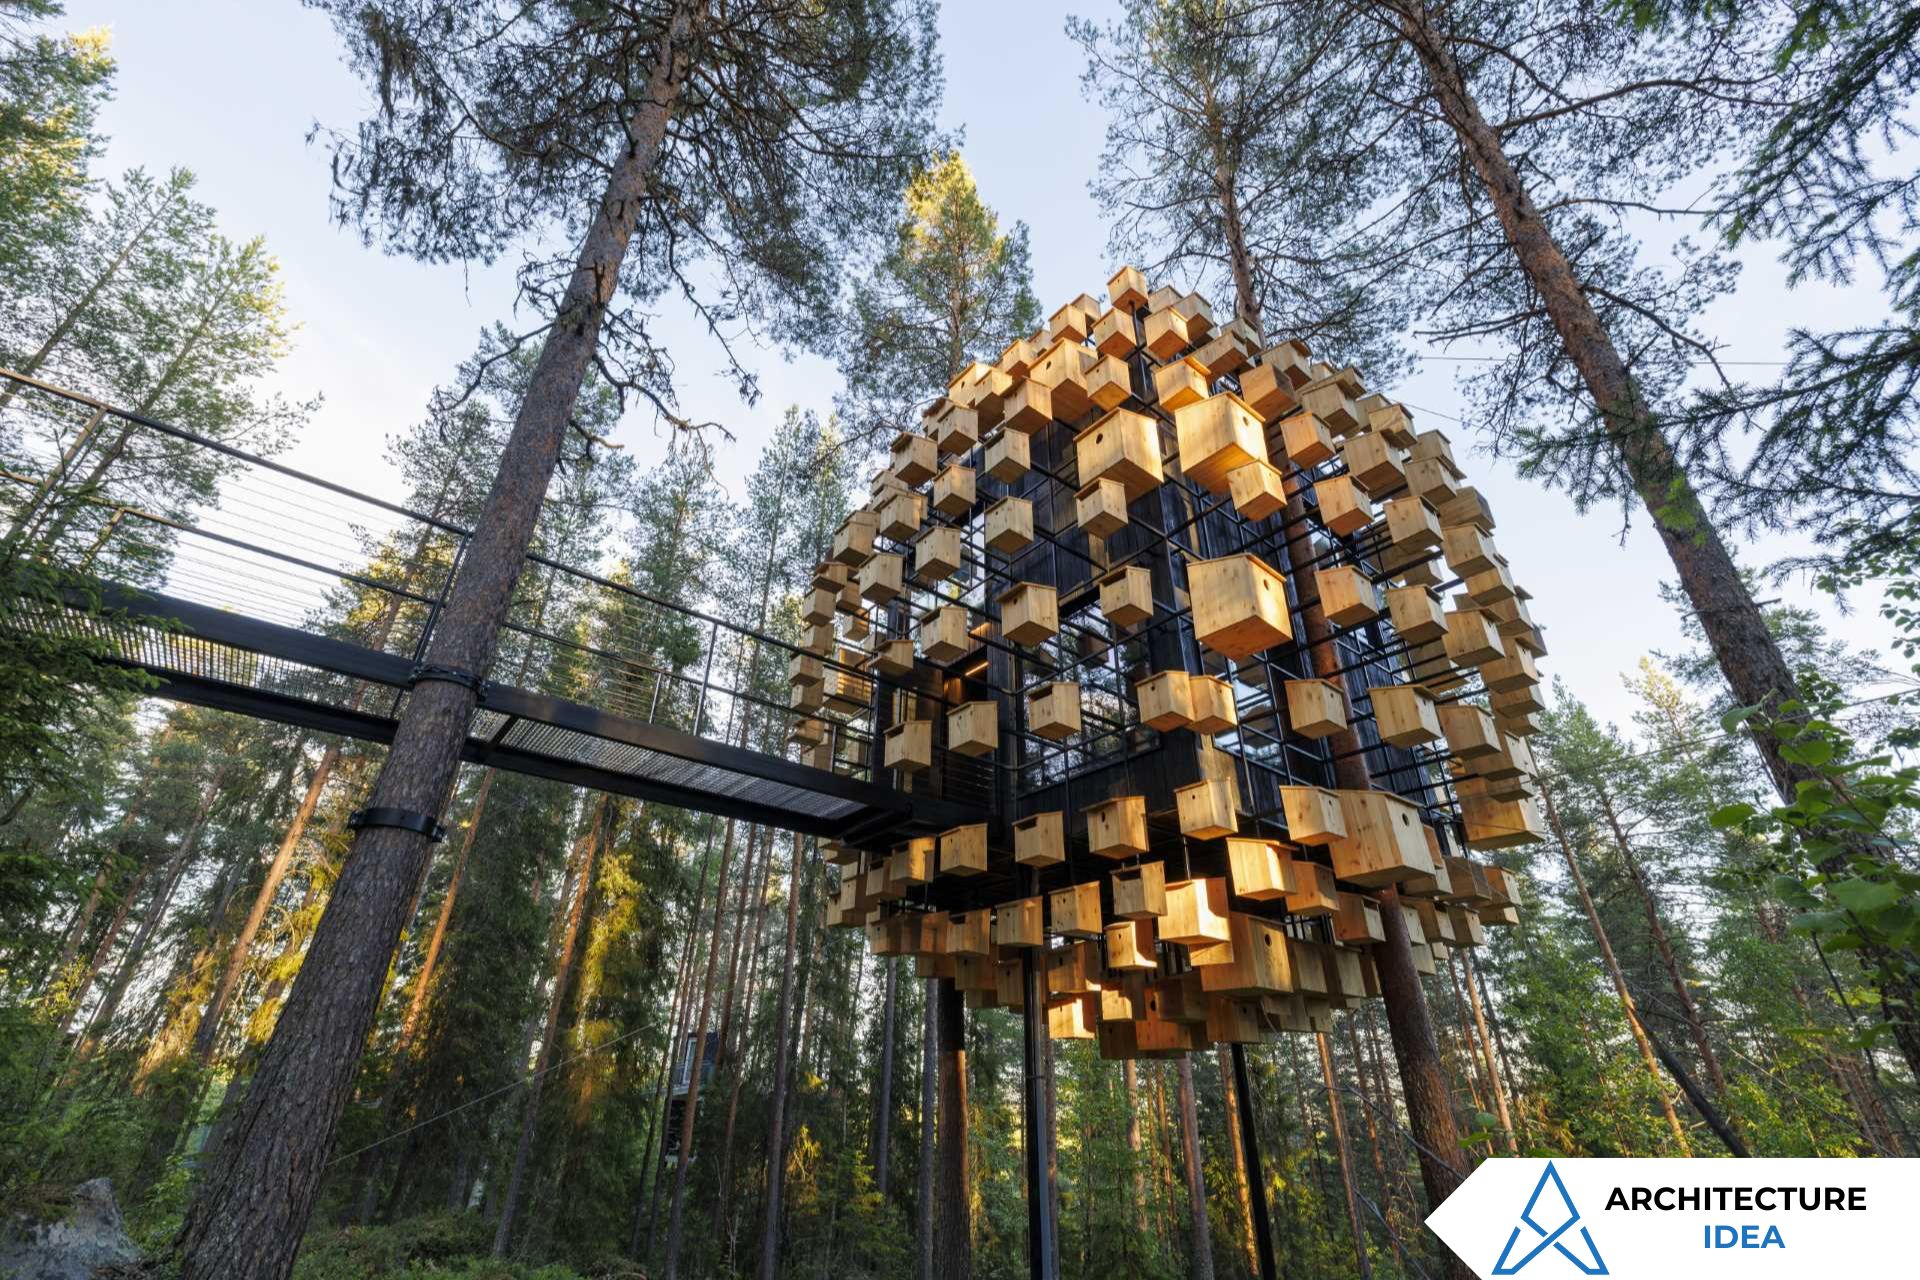 Experience the Magic of 350 Birdhouses in the Swedish Forest